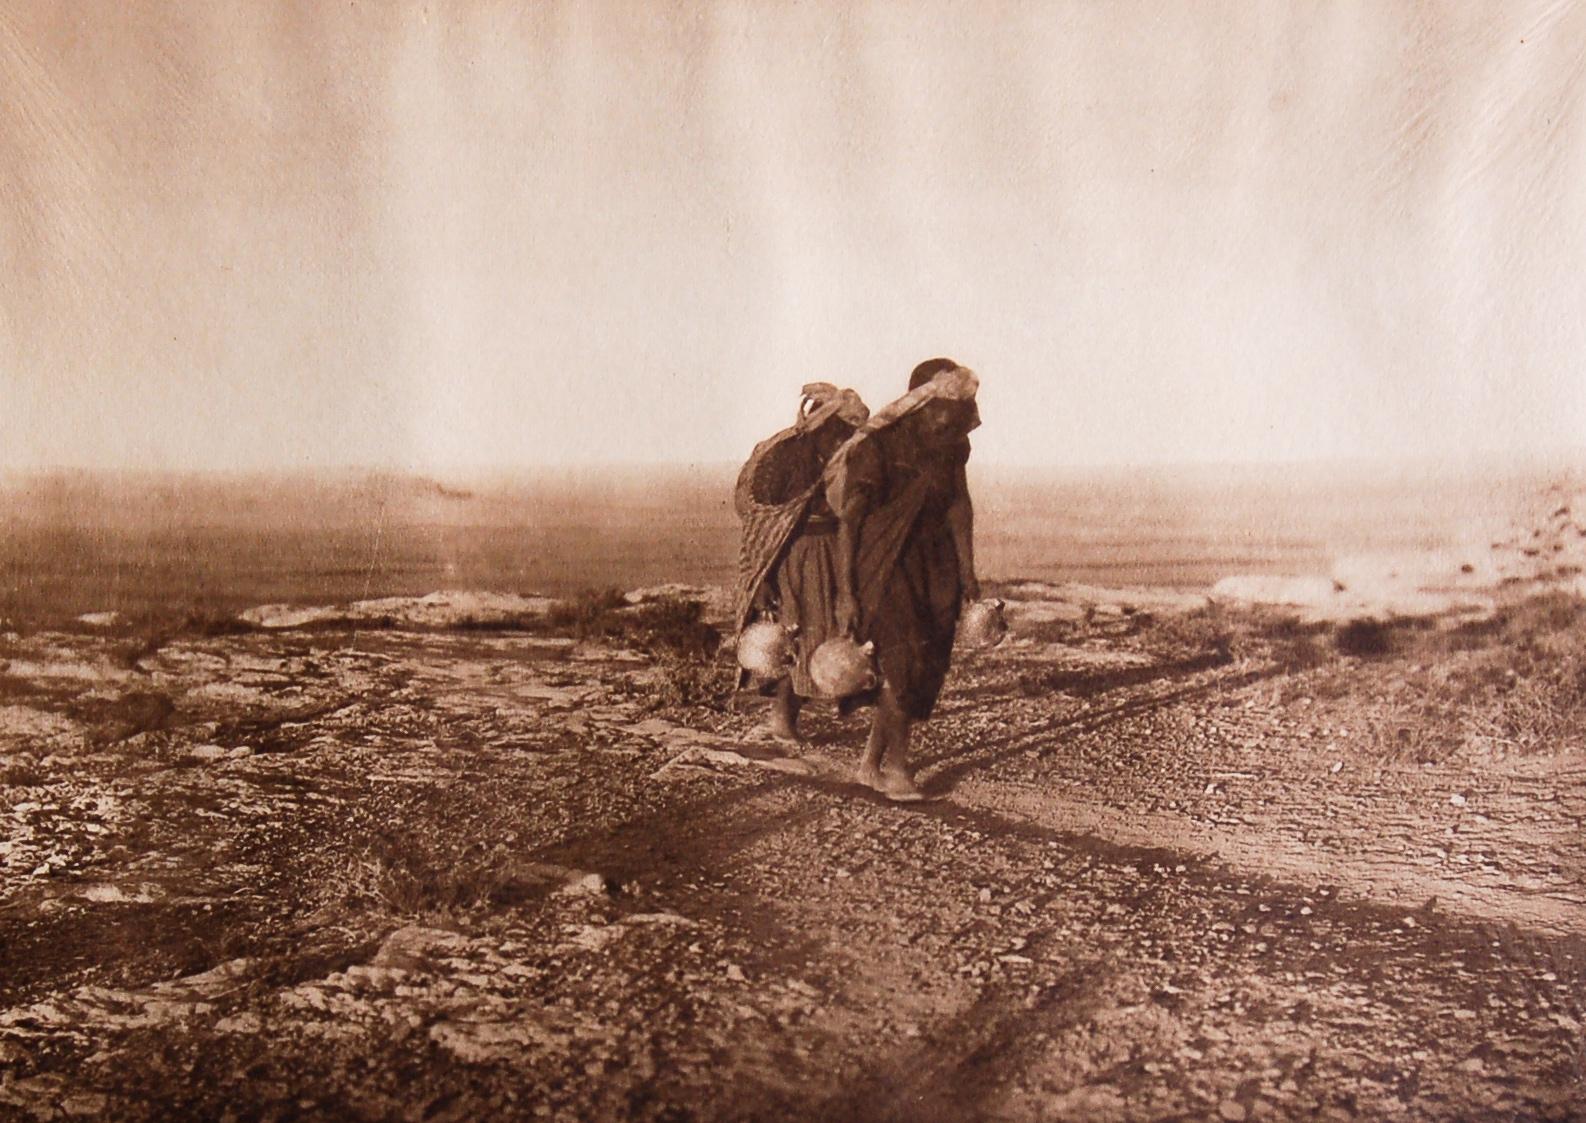 The Water Carriers, 1921 - Photograph by Edward S. Curtis